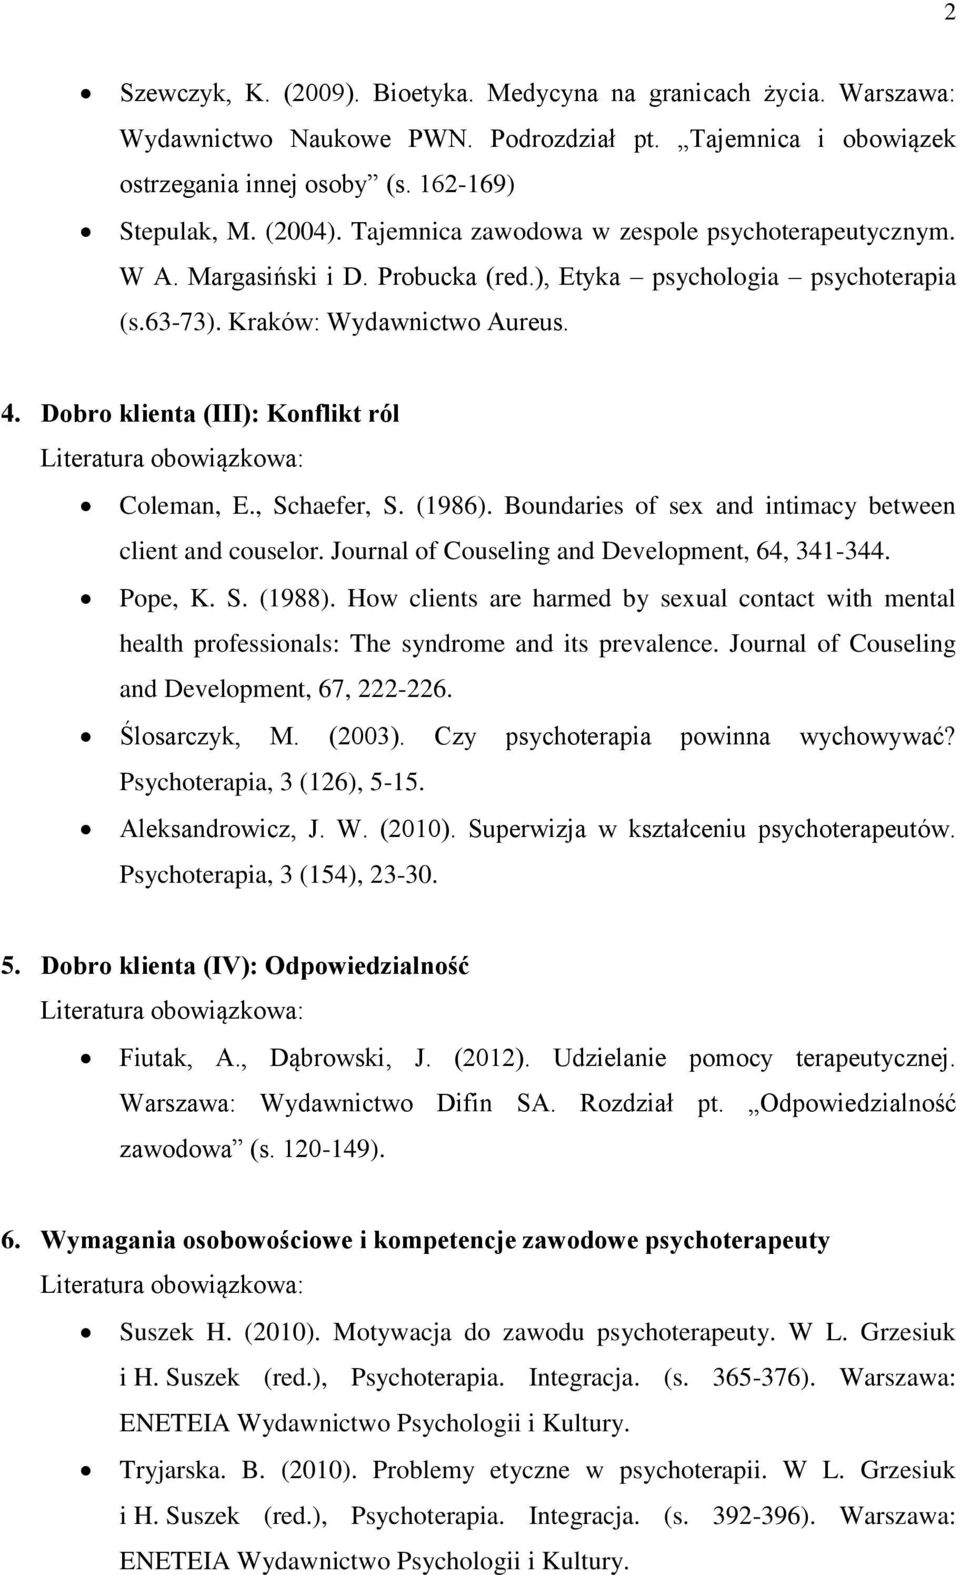 Dobro klienta (III): Konflikt ról Coleman, E., Schaefer, S. (1986). Boundaries of sex and intimacy between client and couselor. Journal of Couseling and Development, 64, 341-344. Pope, K. S. (1988).